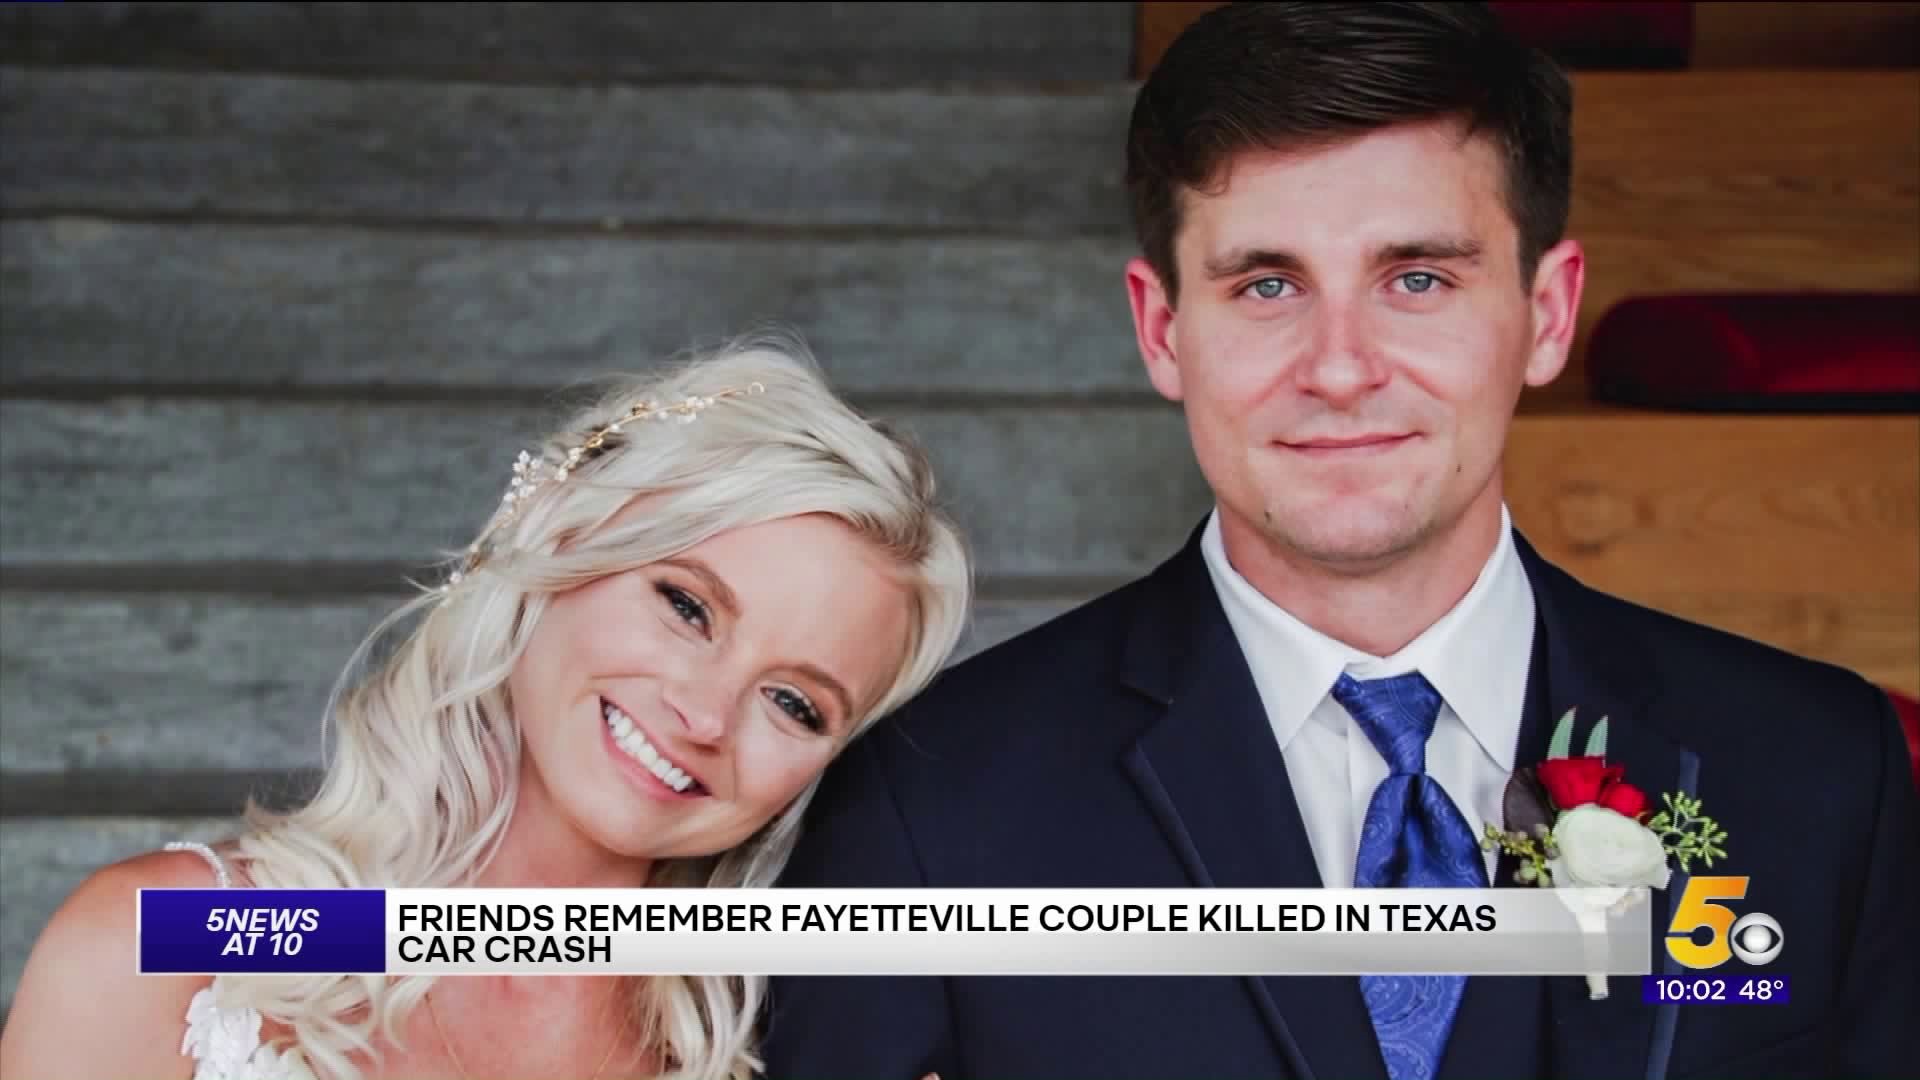 Friends Remember Local Newlyweds Killed In Tragic Accident